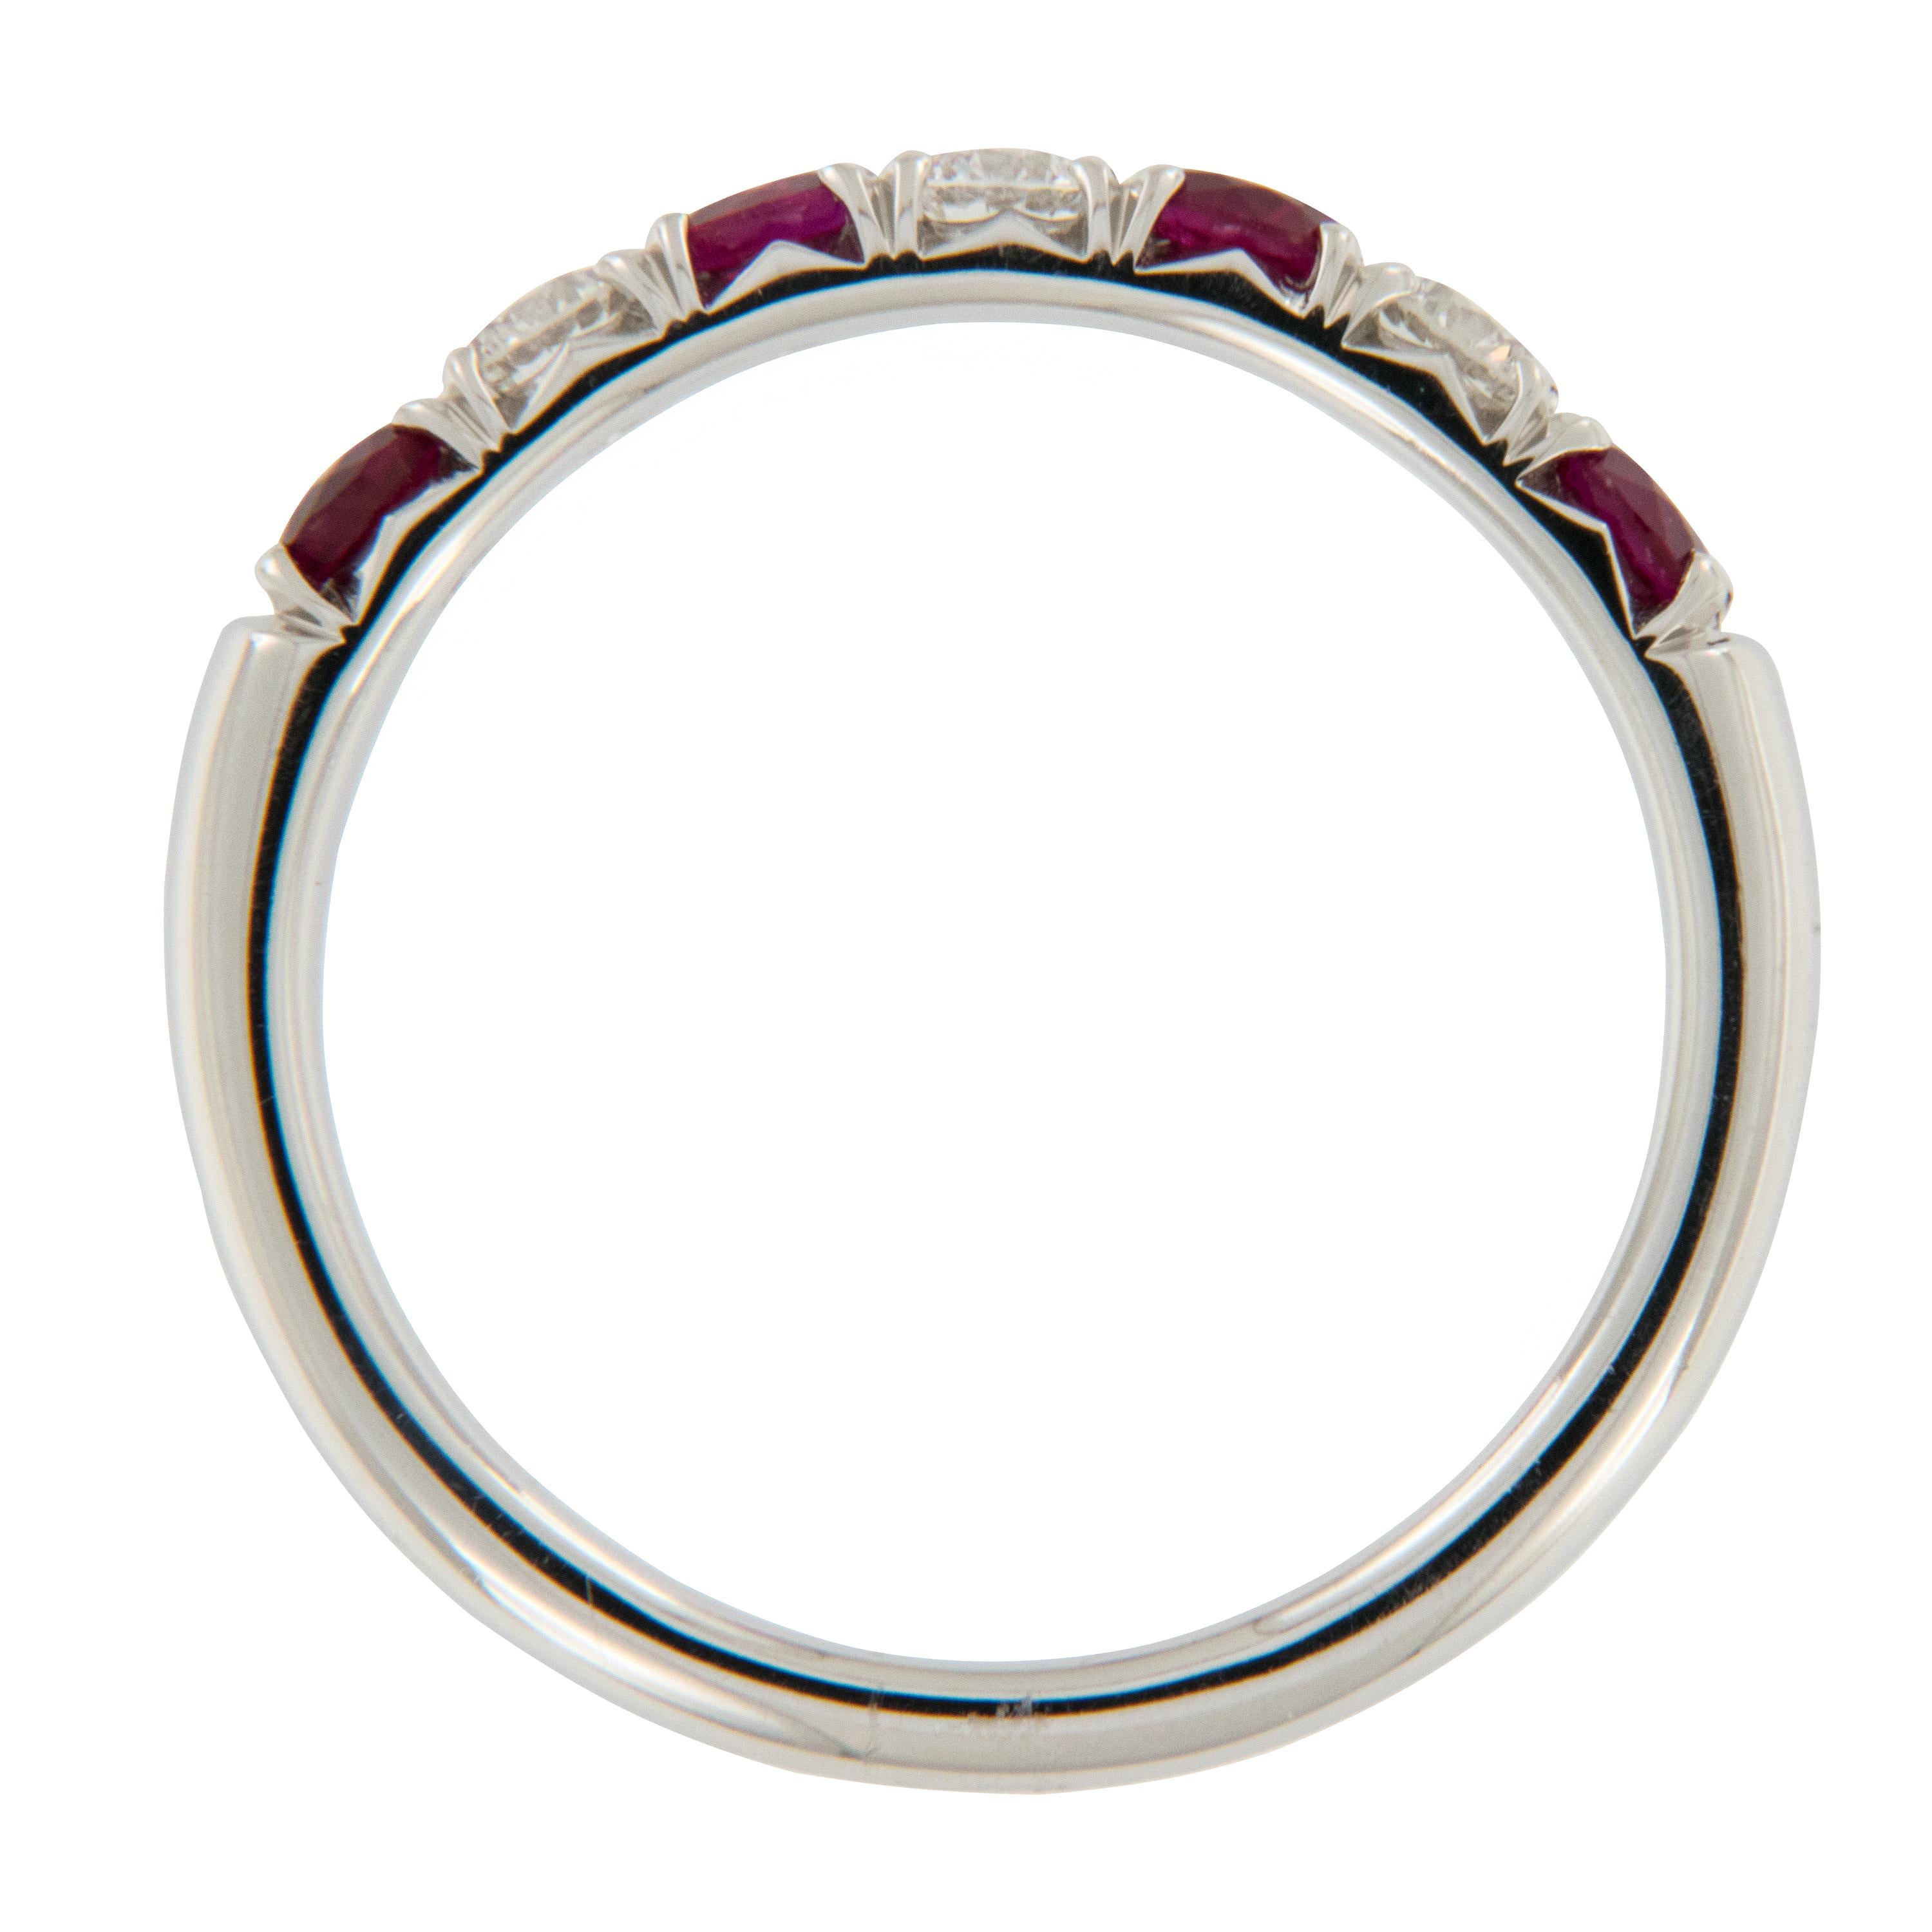 Contemporary 18 Karat White Gold Ruby & Diamond Stackable Band Ring by Spark Creations For Sale